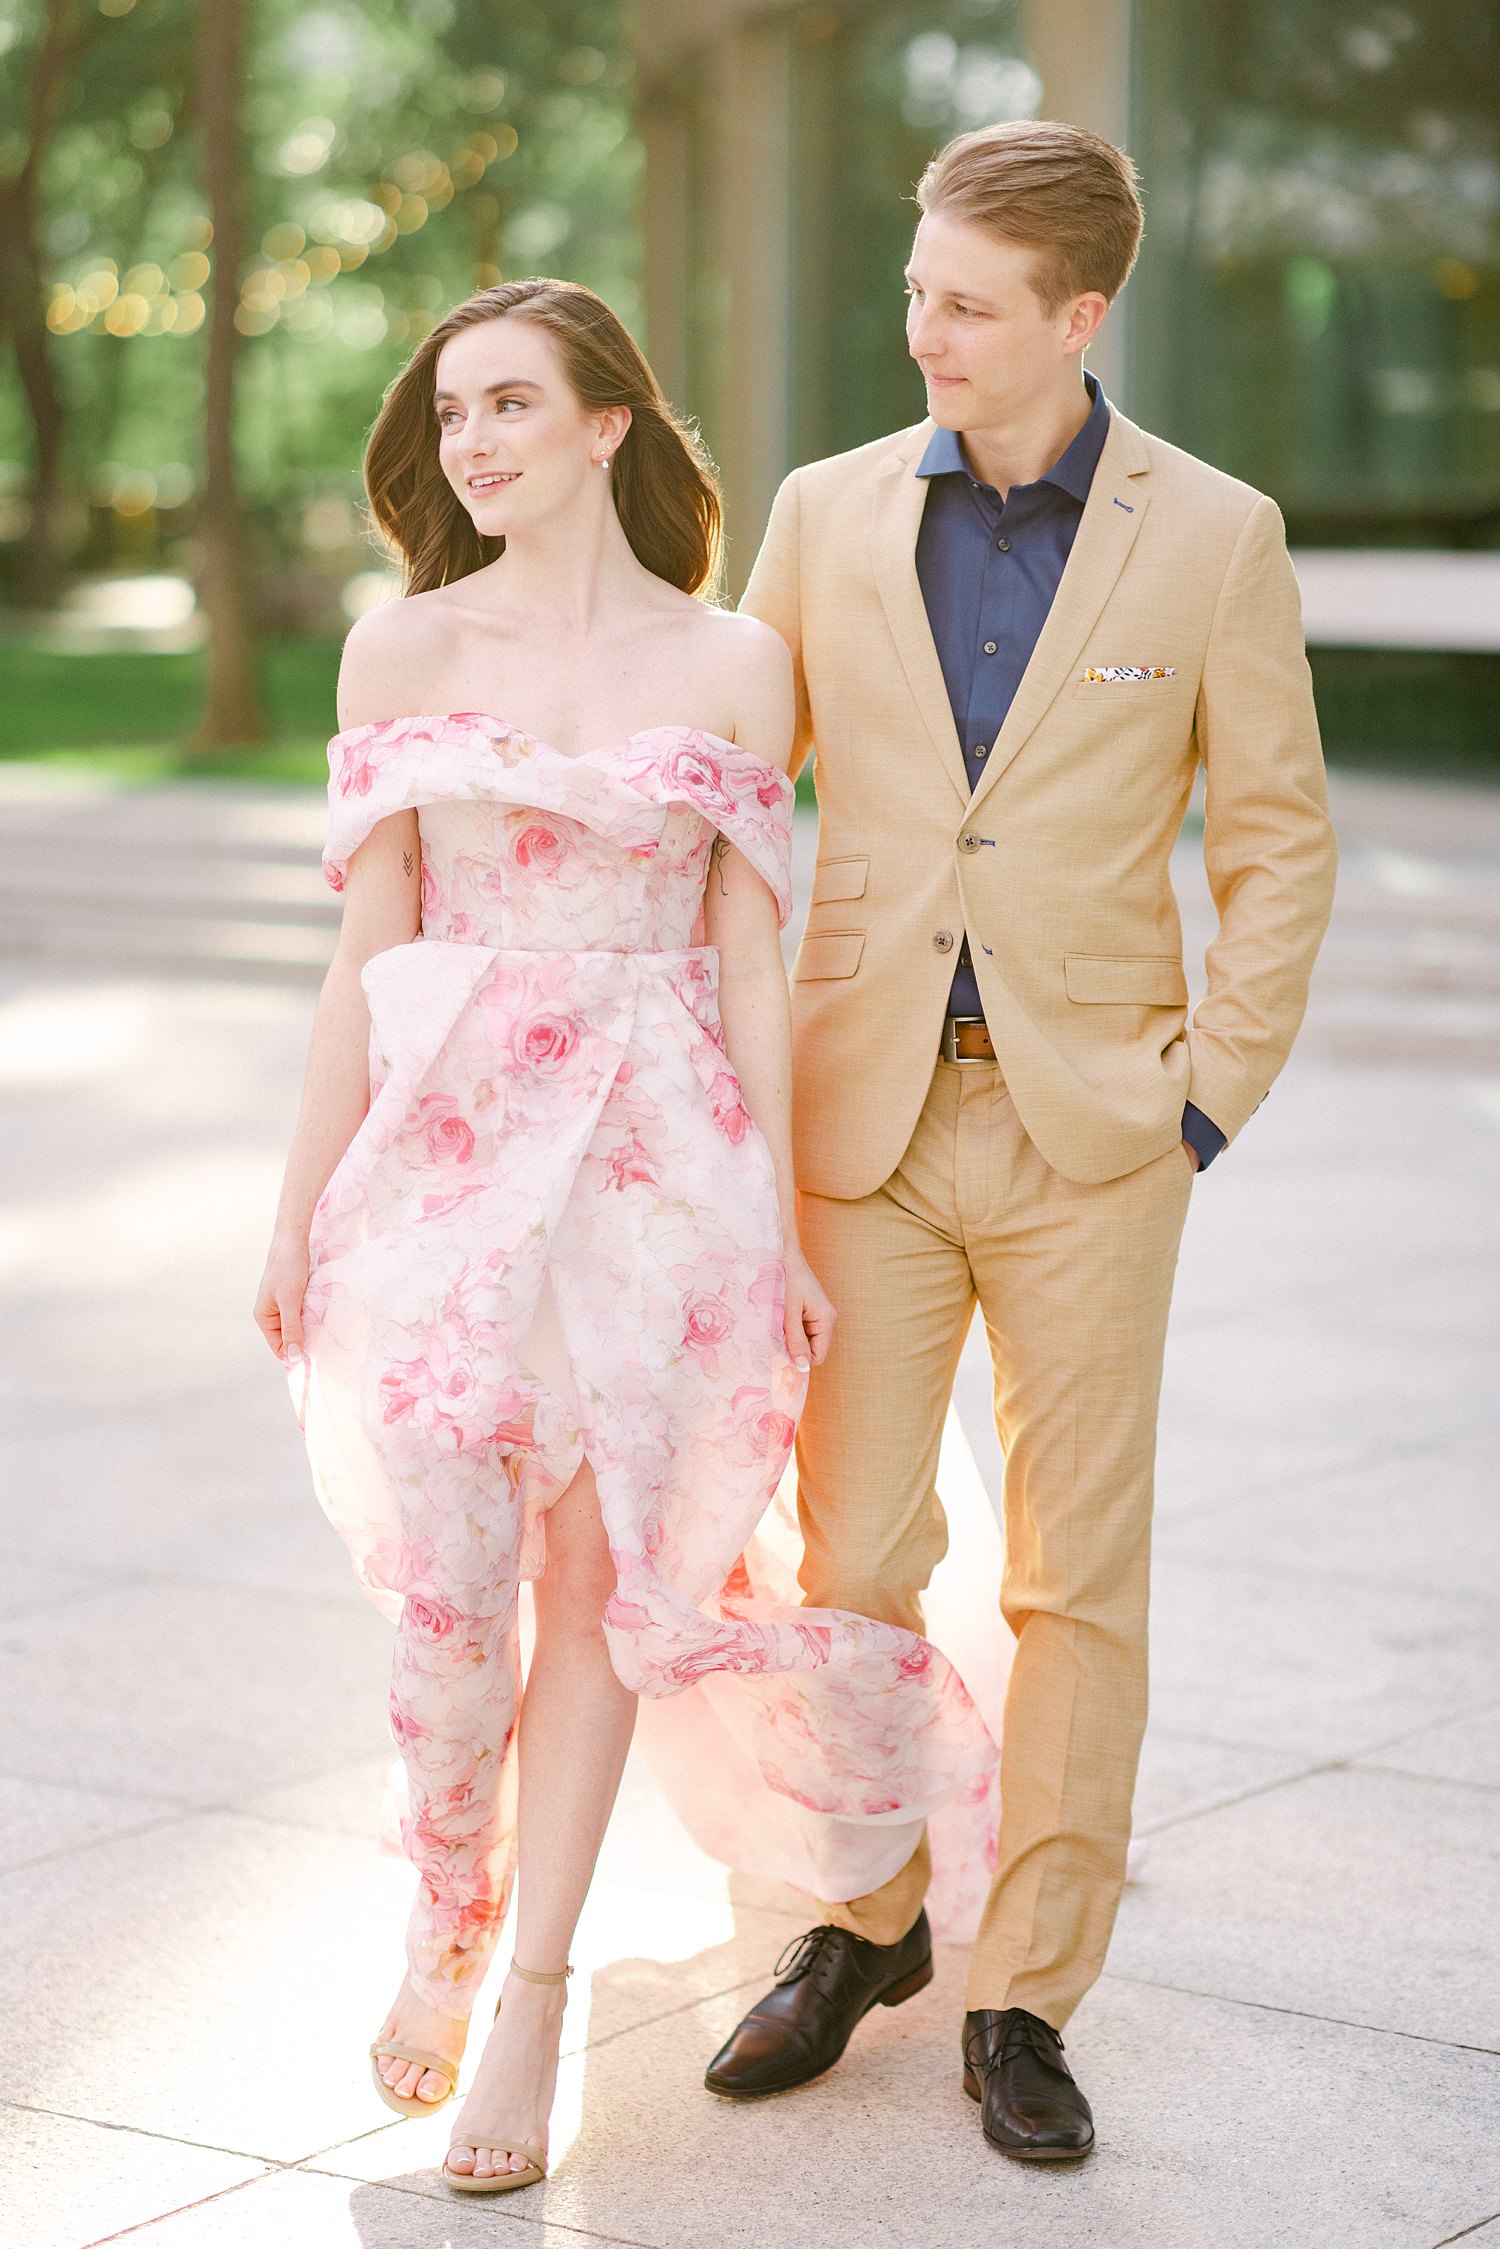 smiling woman in Pink floral gown walking with man in tan suite and blue shirt